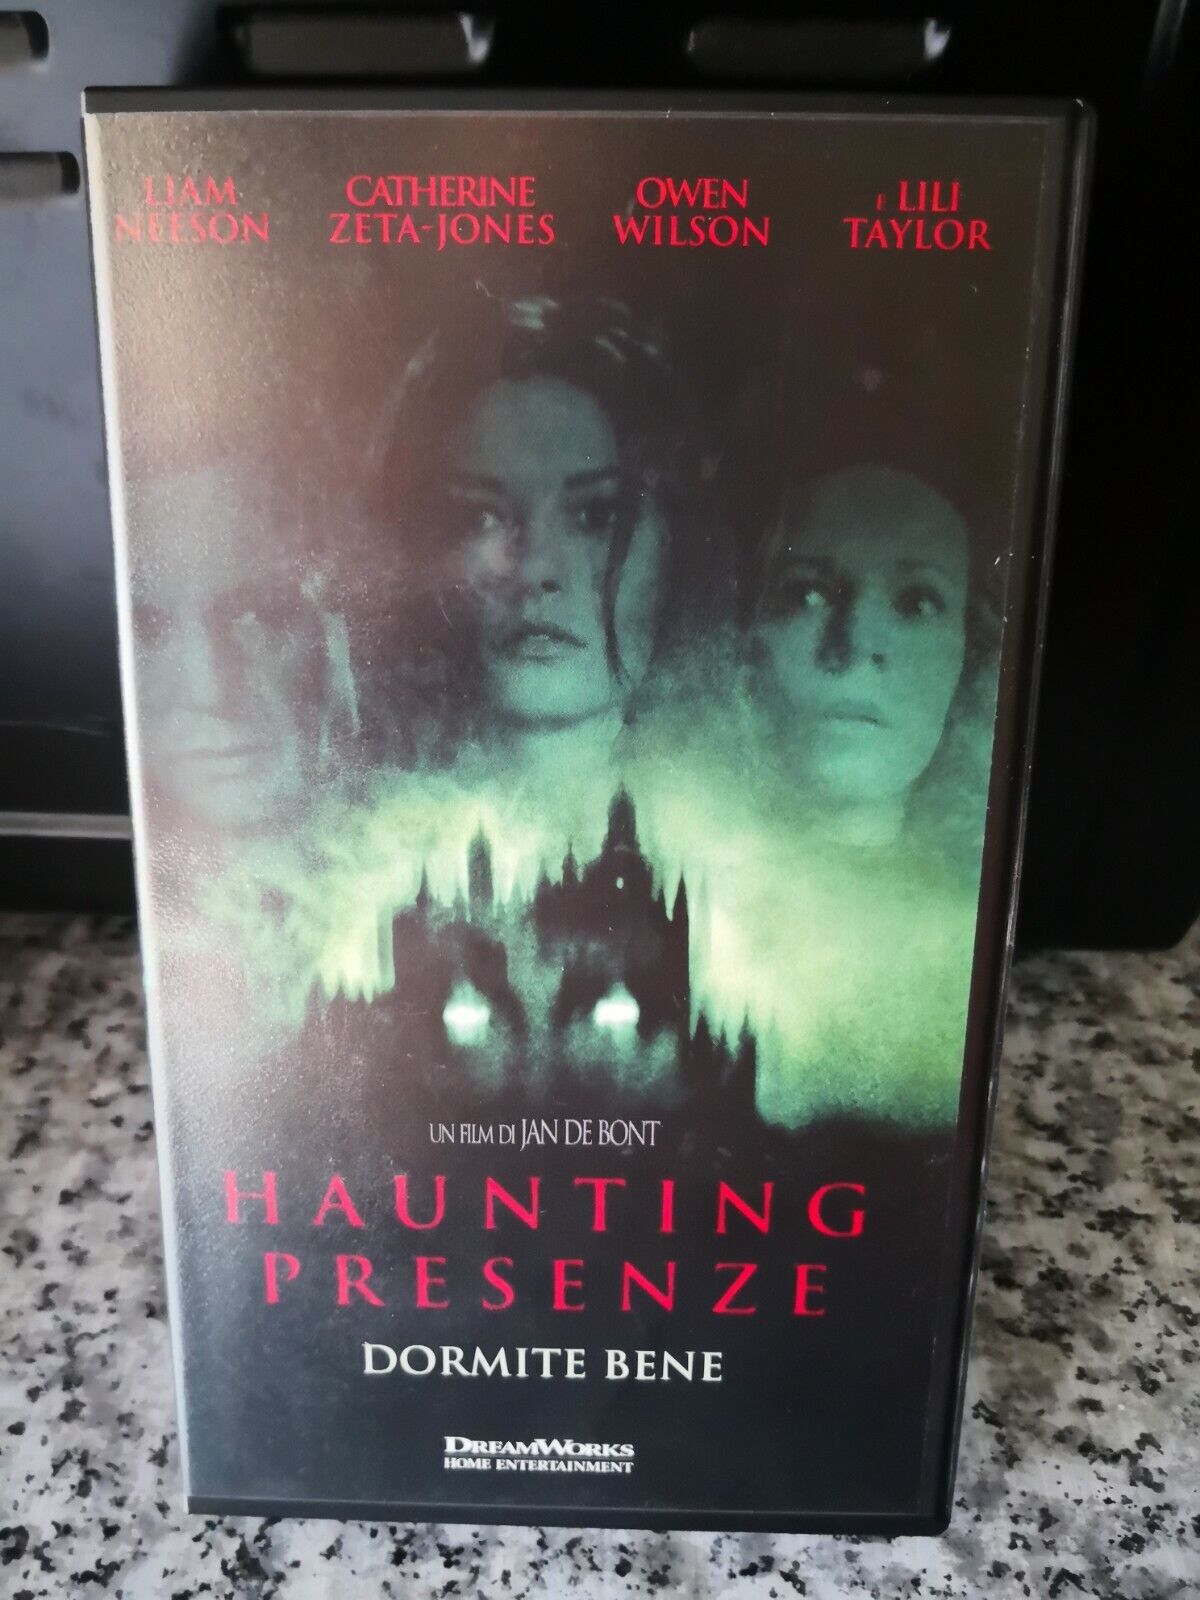 Haunting Presenze -  VHS - 1999 - Univideo -F 